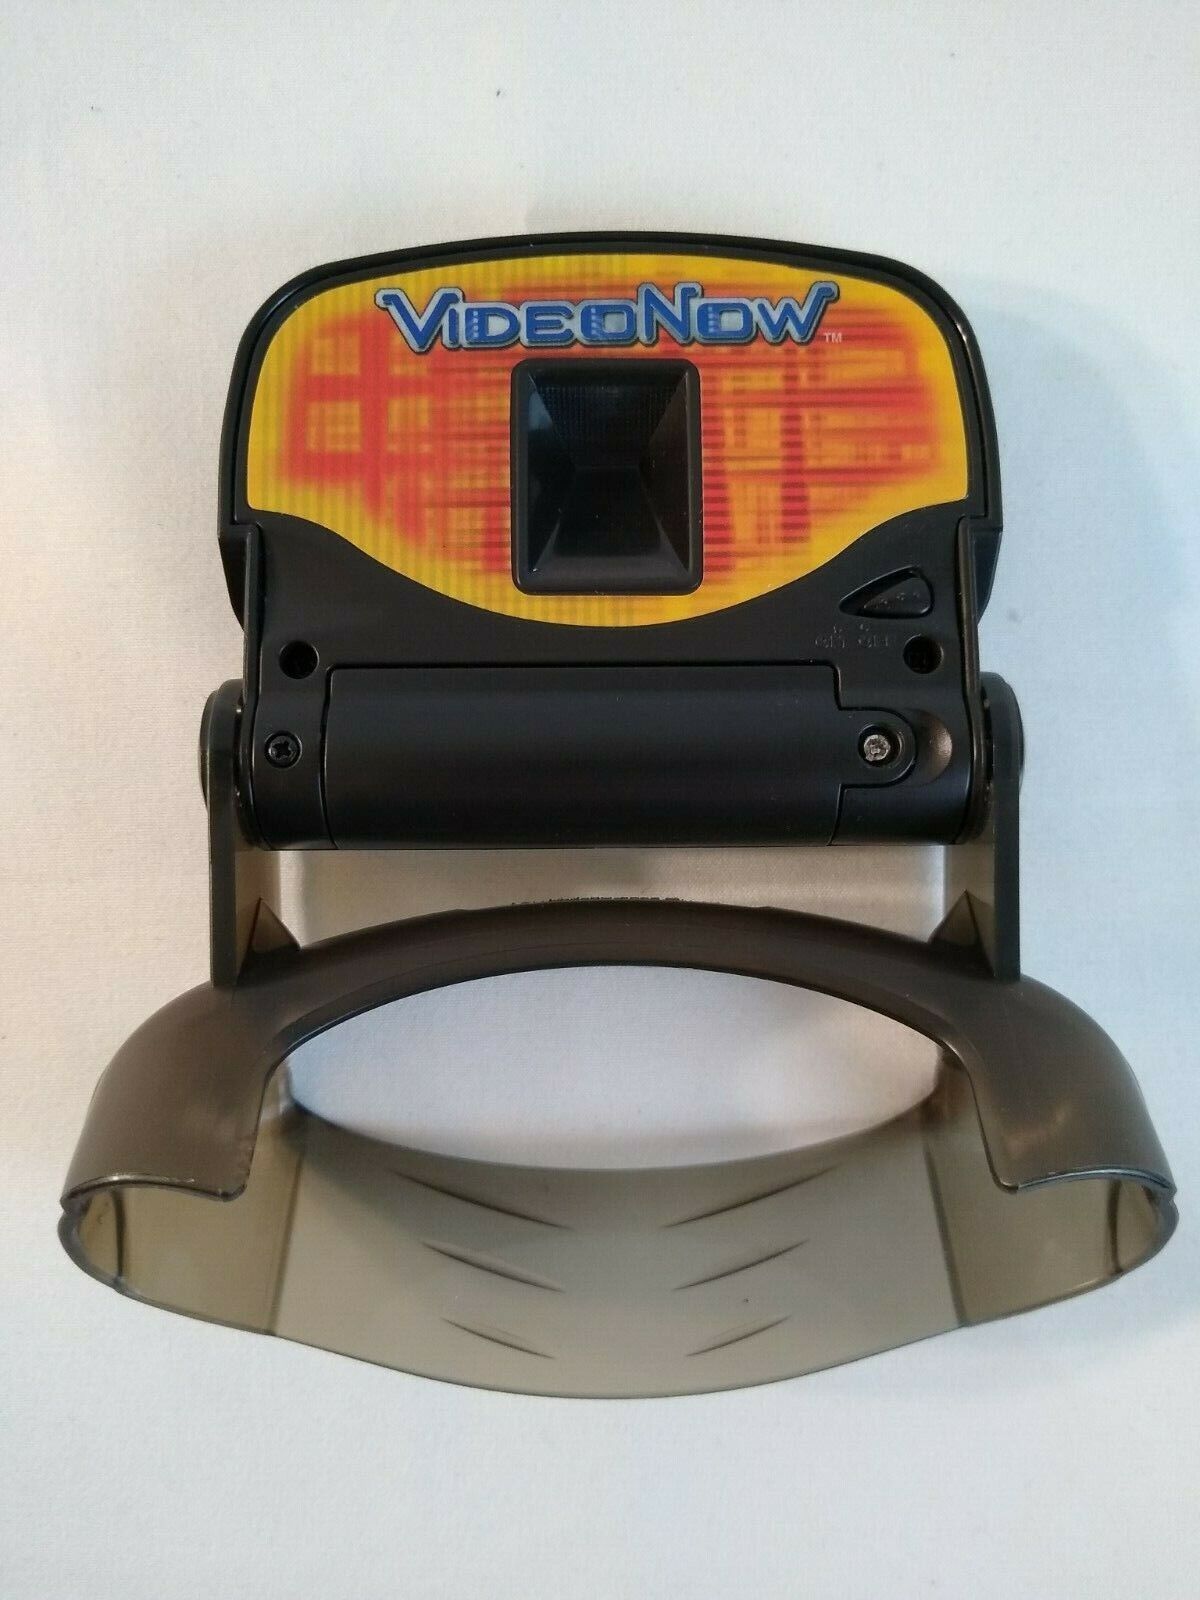 Videonow Light - For Use With Hasbro Video Now Player